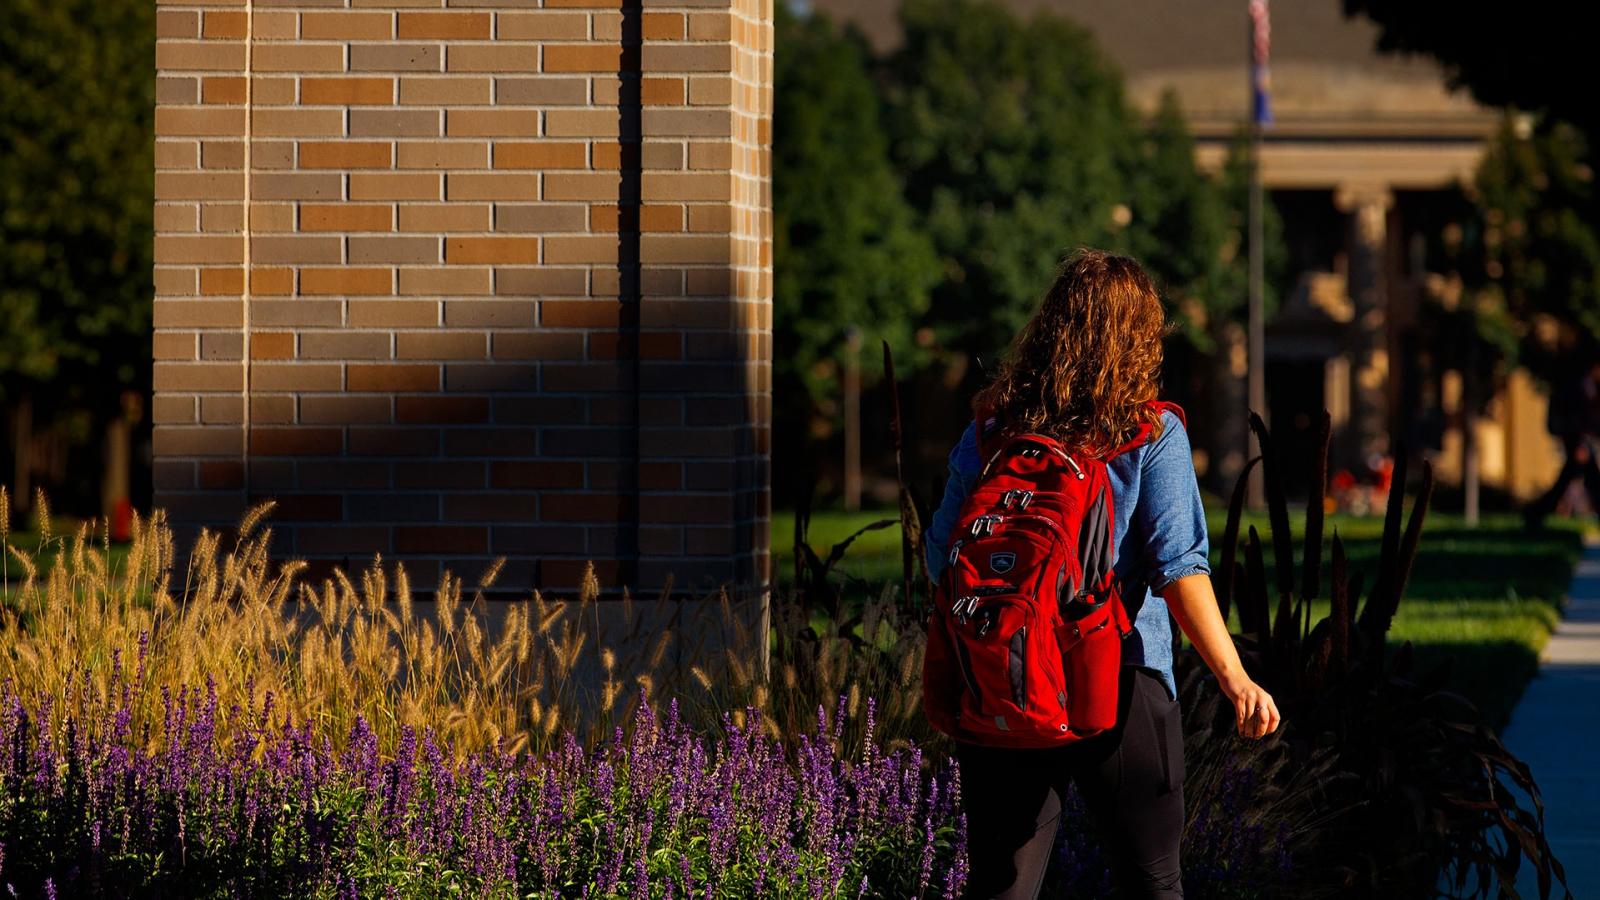 University of Nebraska–Lincoln student with scarlet backpack ascends on campus.